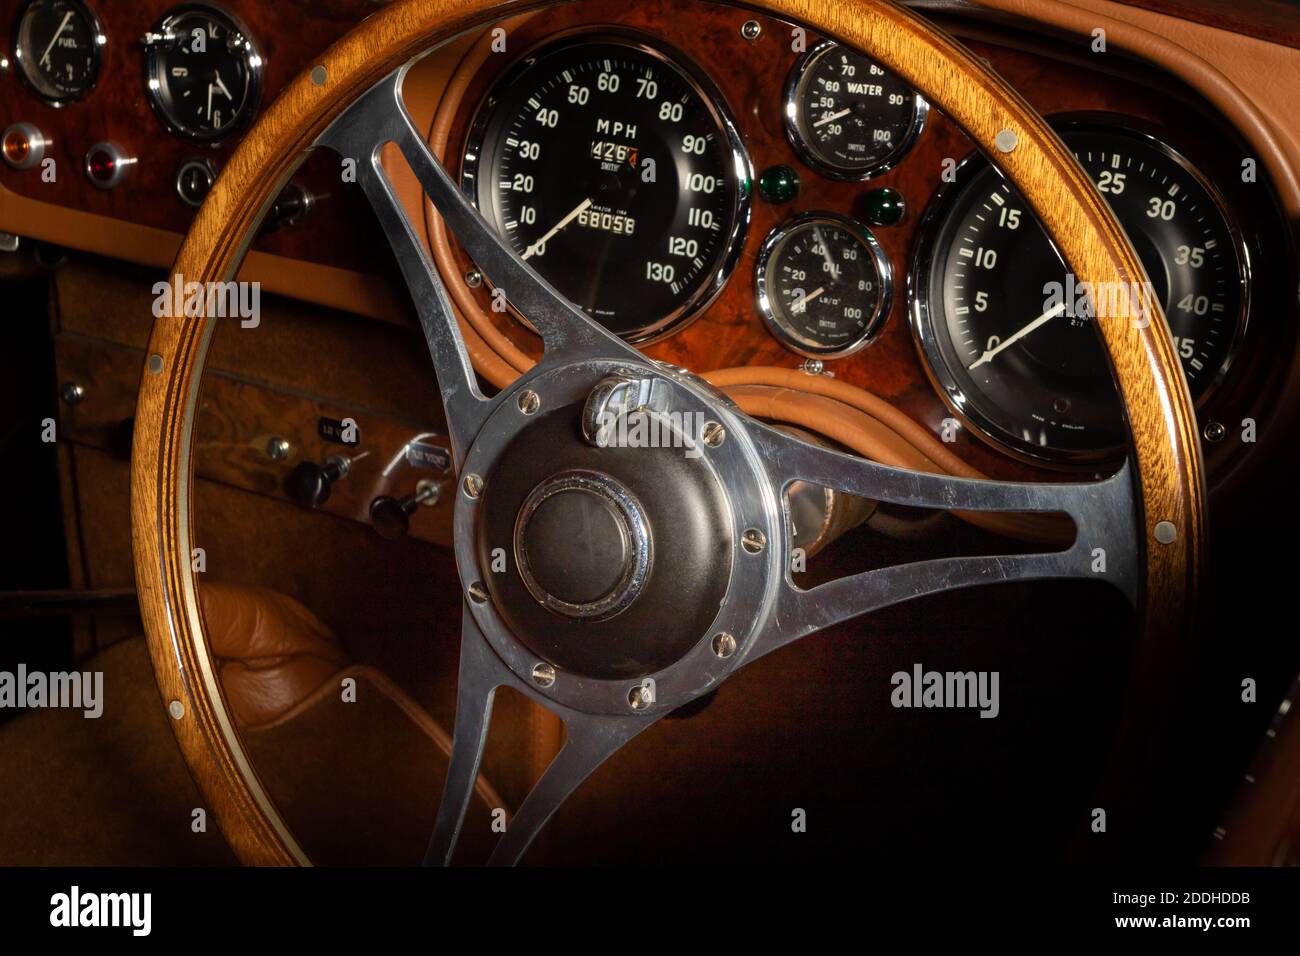 1960 AC Aceca, interior view of steering wheel and dashboard, Studio 434 car collection Stock Photo